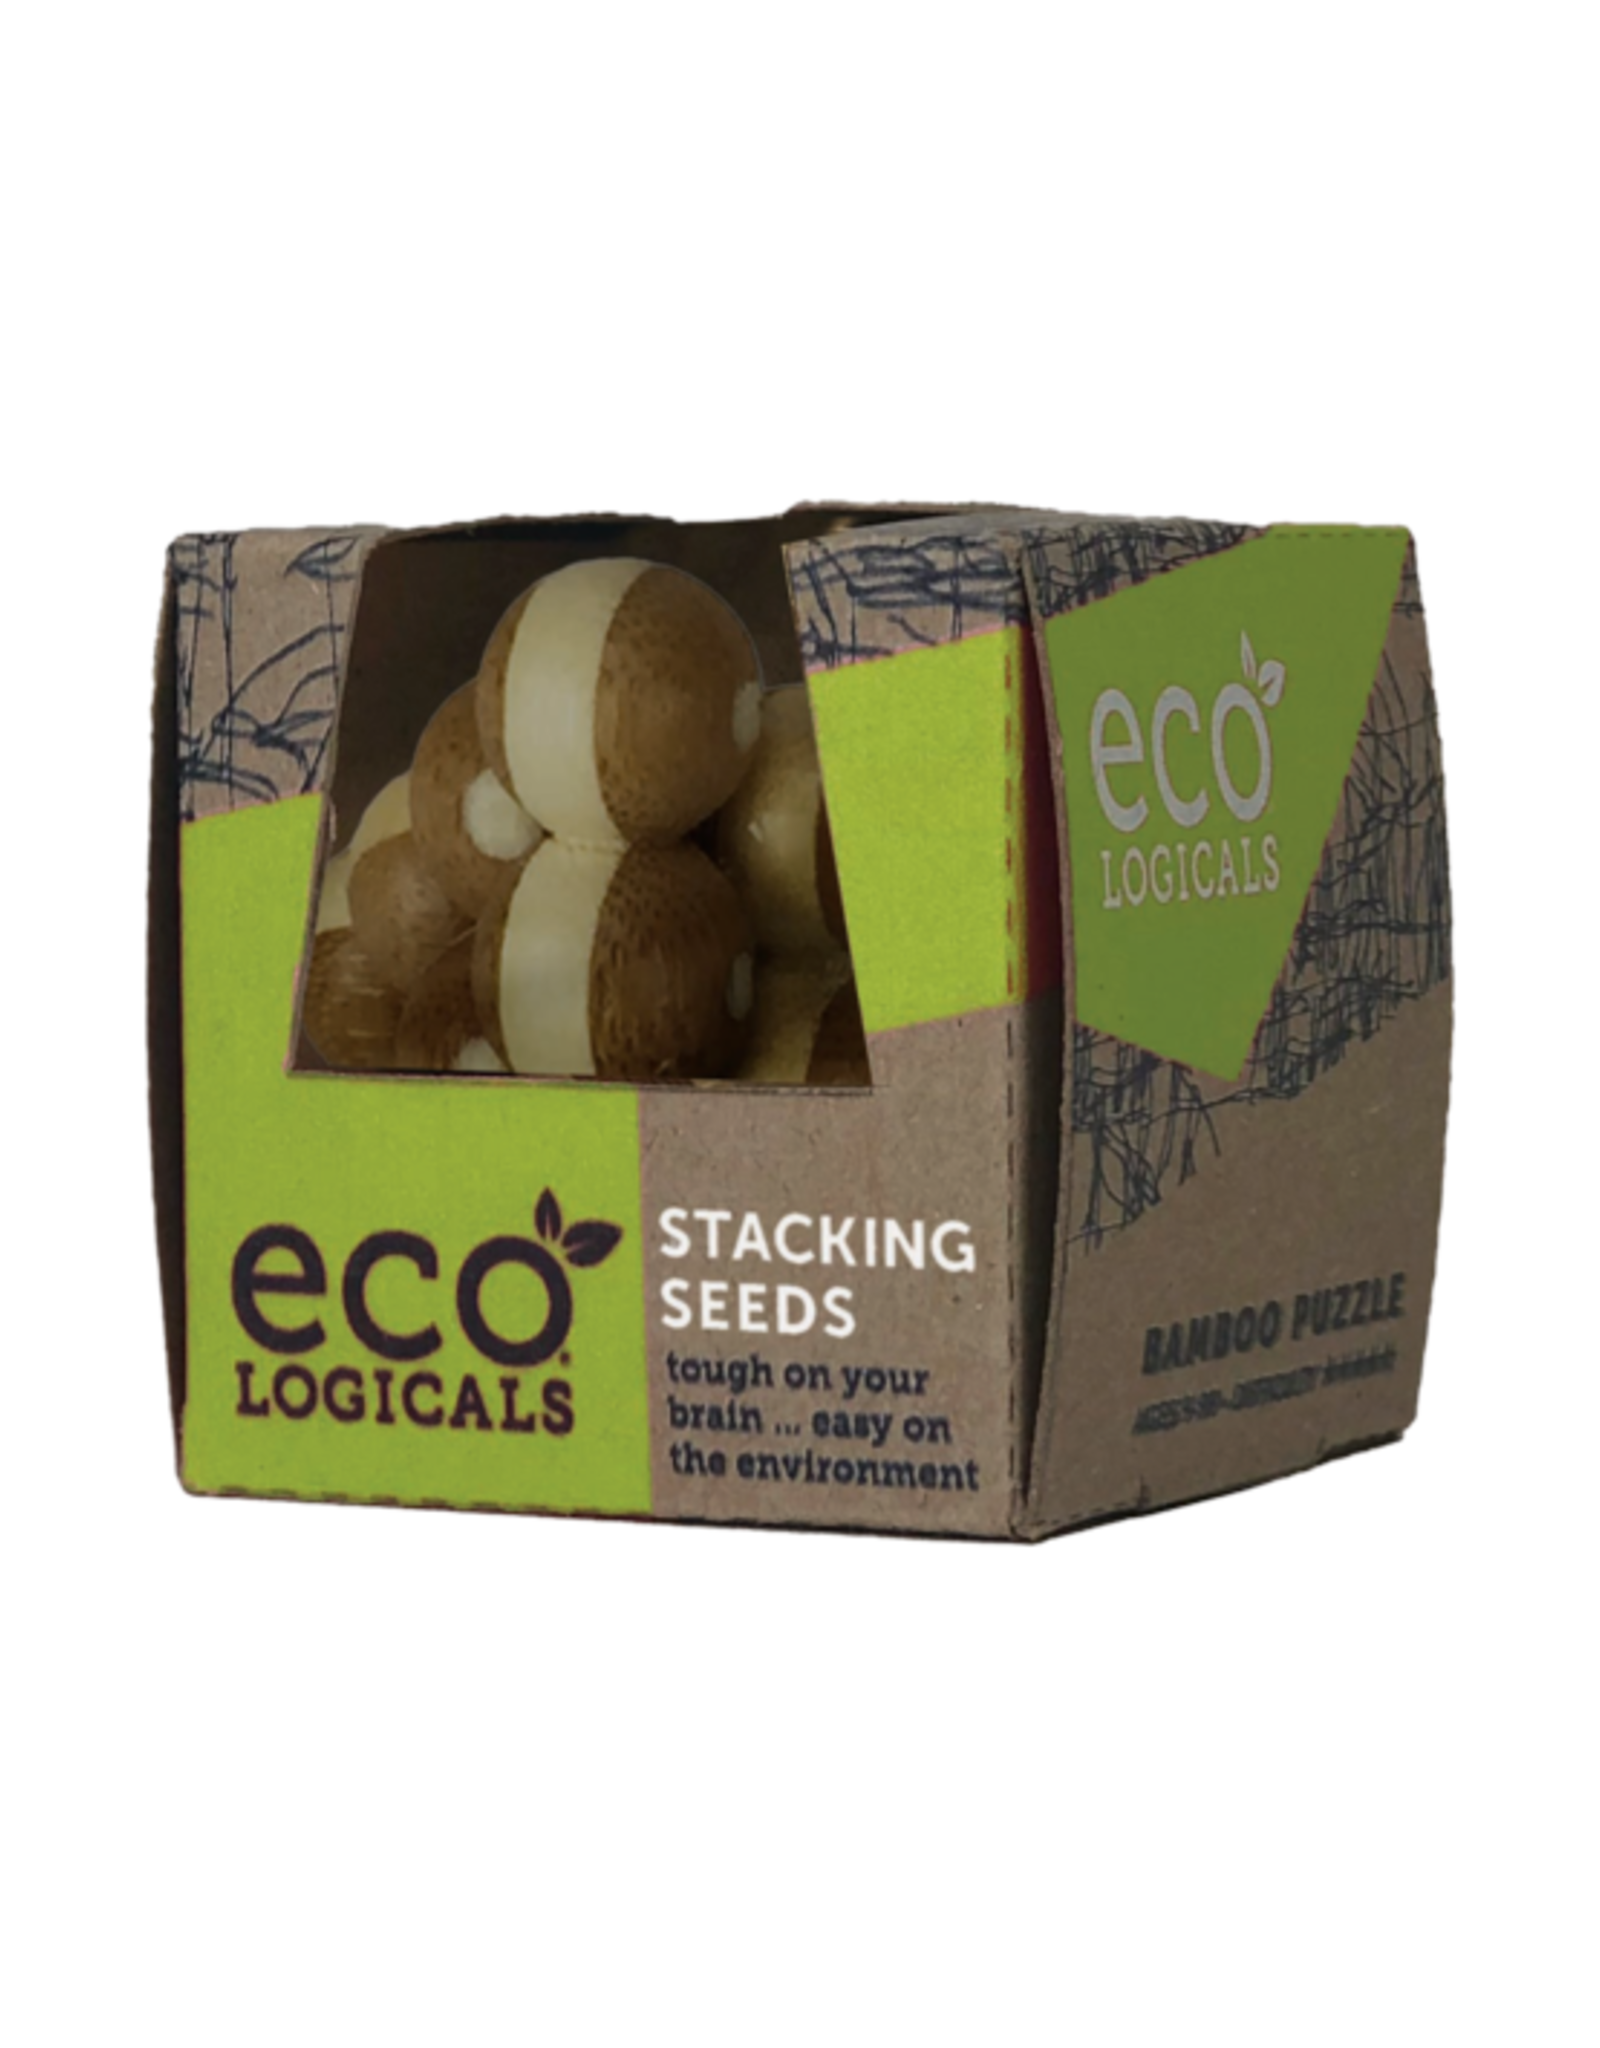 Eco Logicals - Stacking Seeds